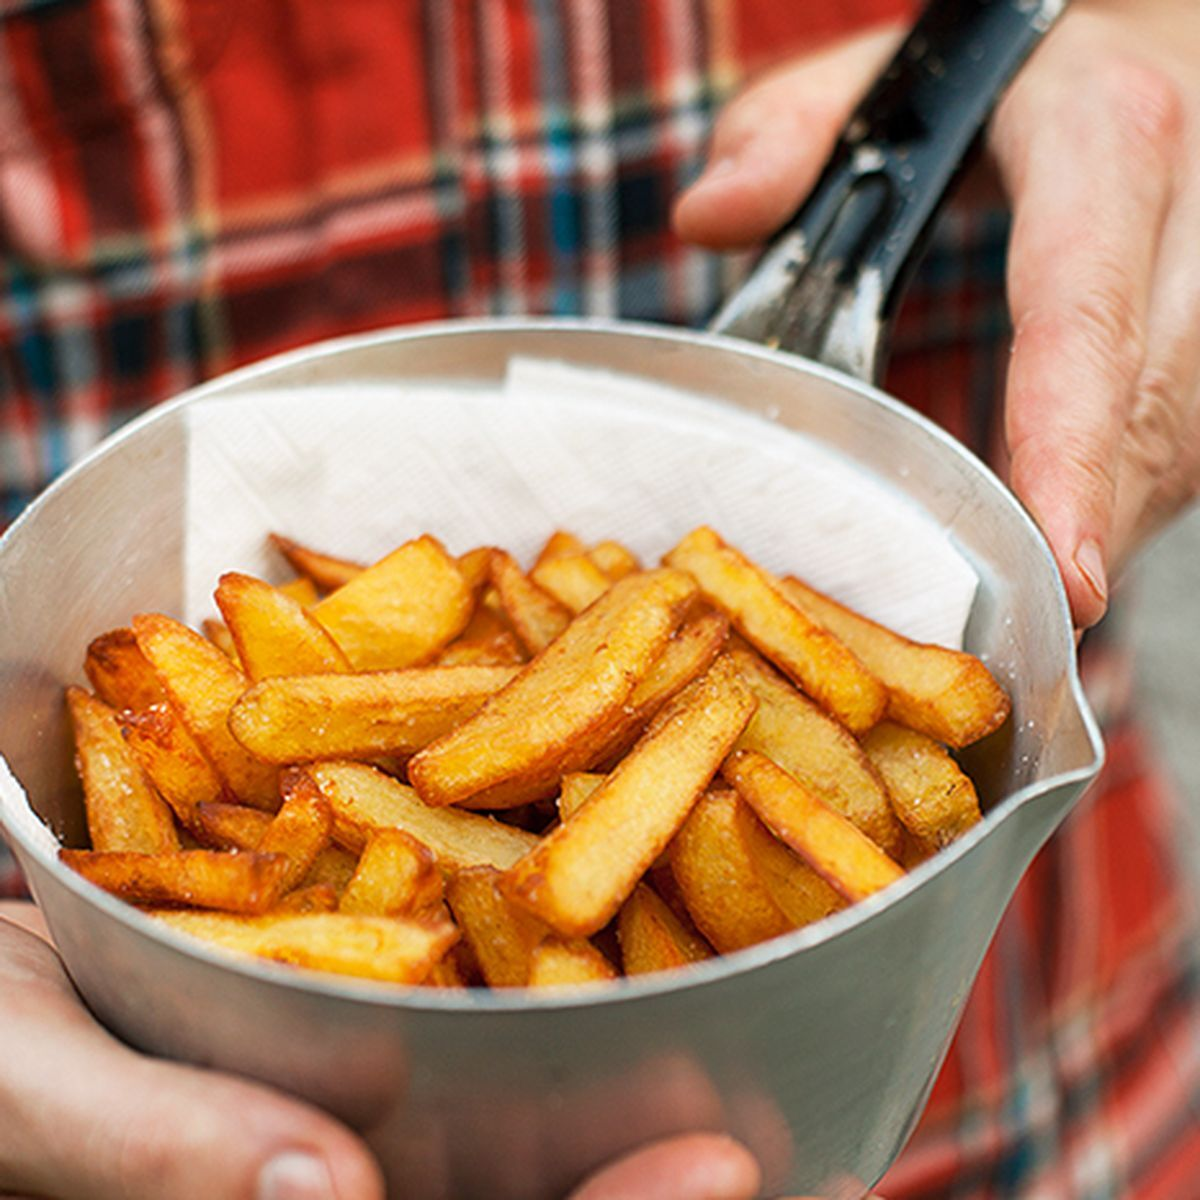 Potatoes stick to the pan and burn: how not to fry a vegetable